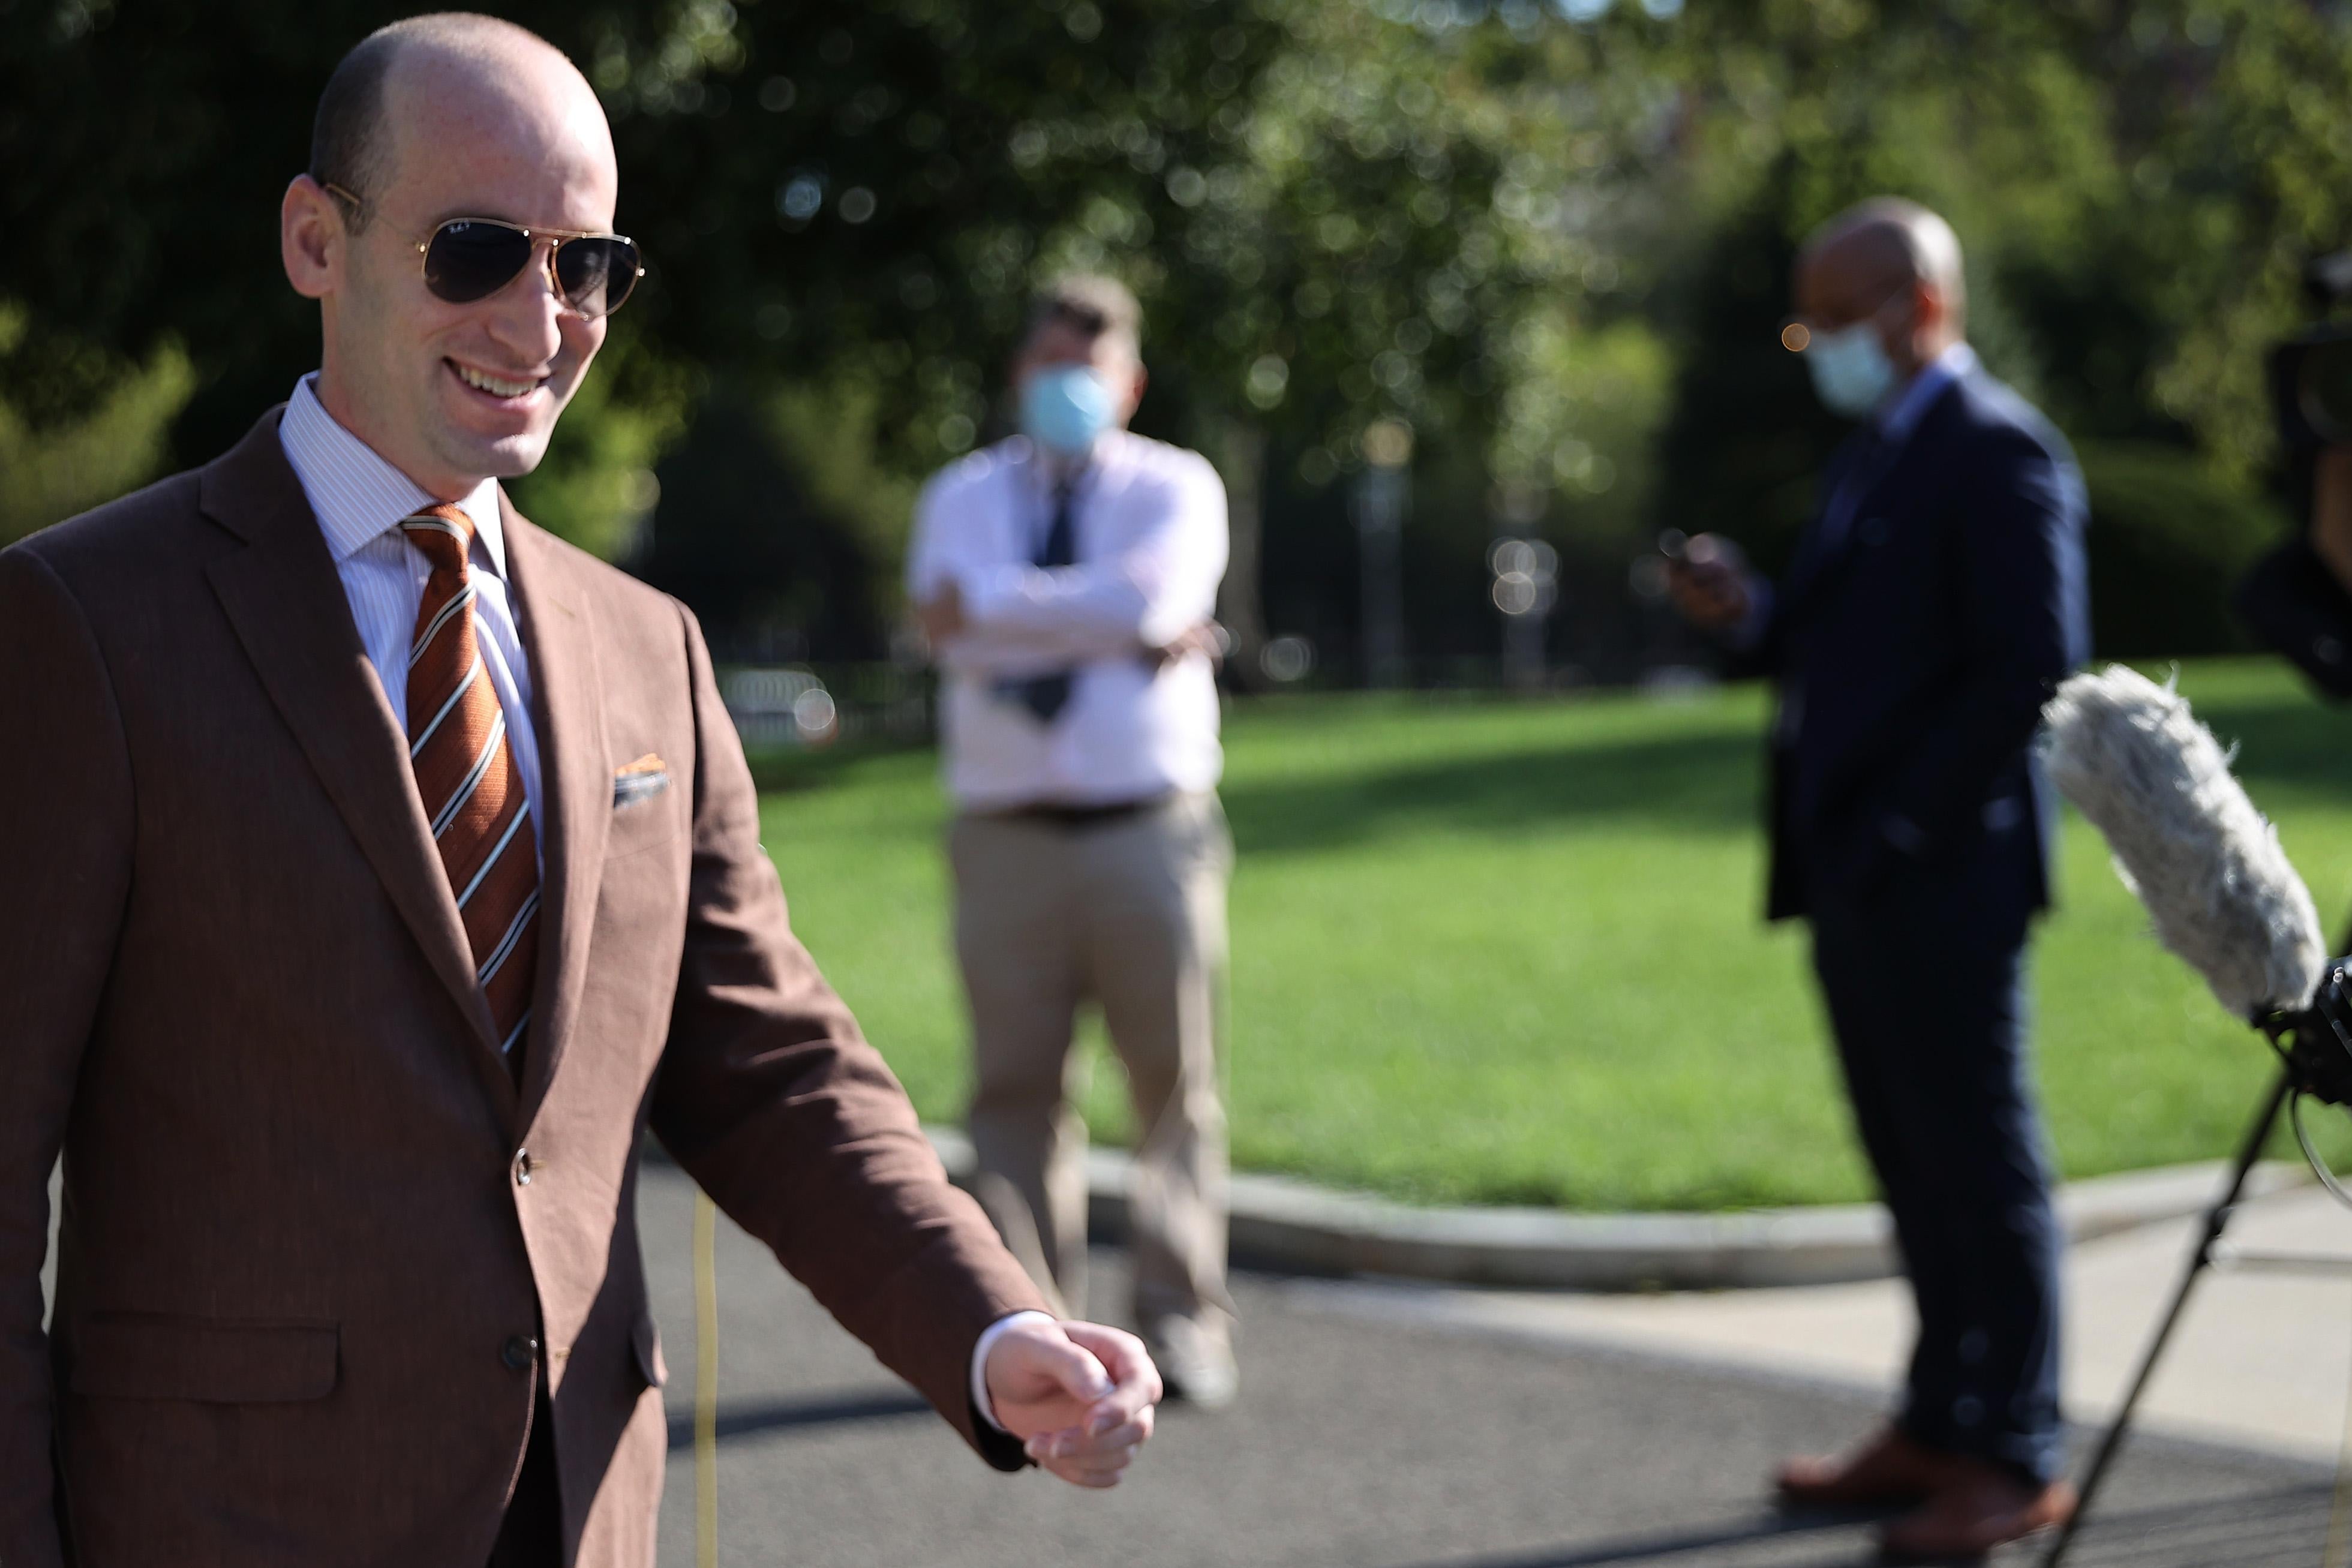 Stephen Miller, wearing a brown suit and aviator sunglasses, smiling widely as he walks